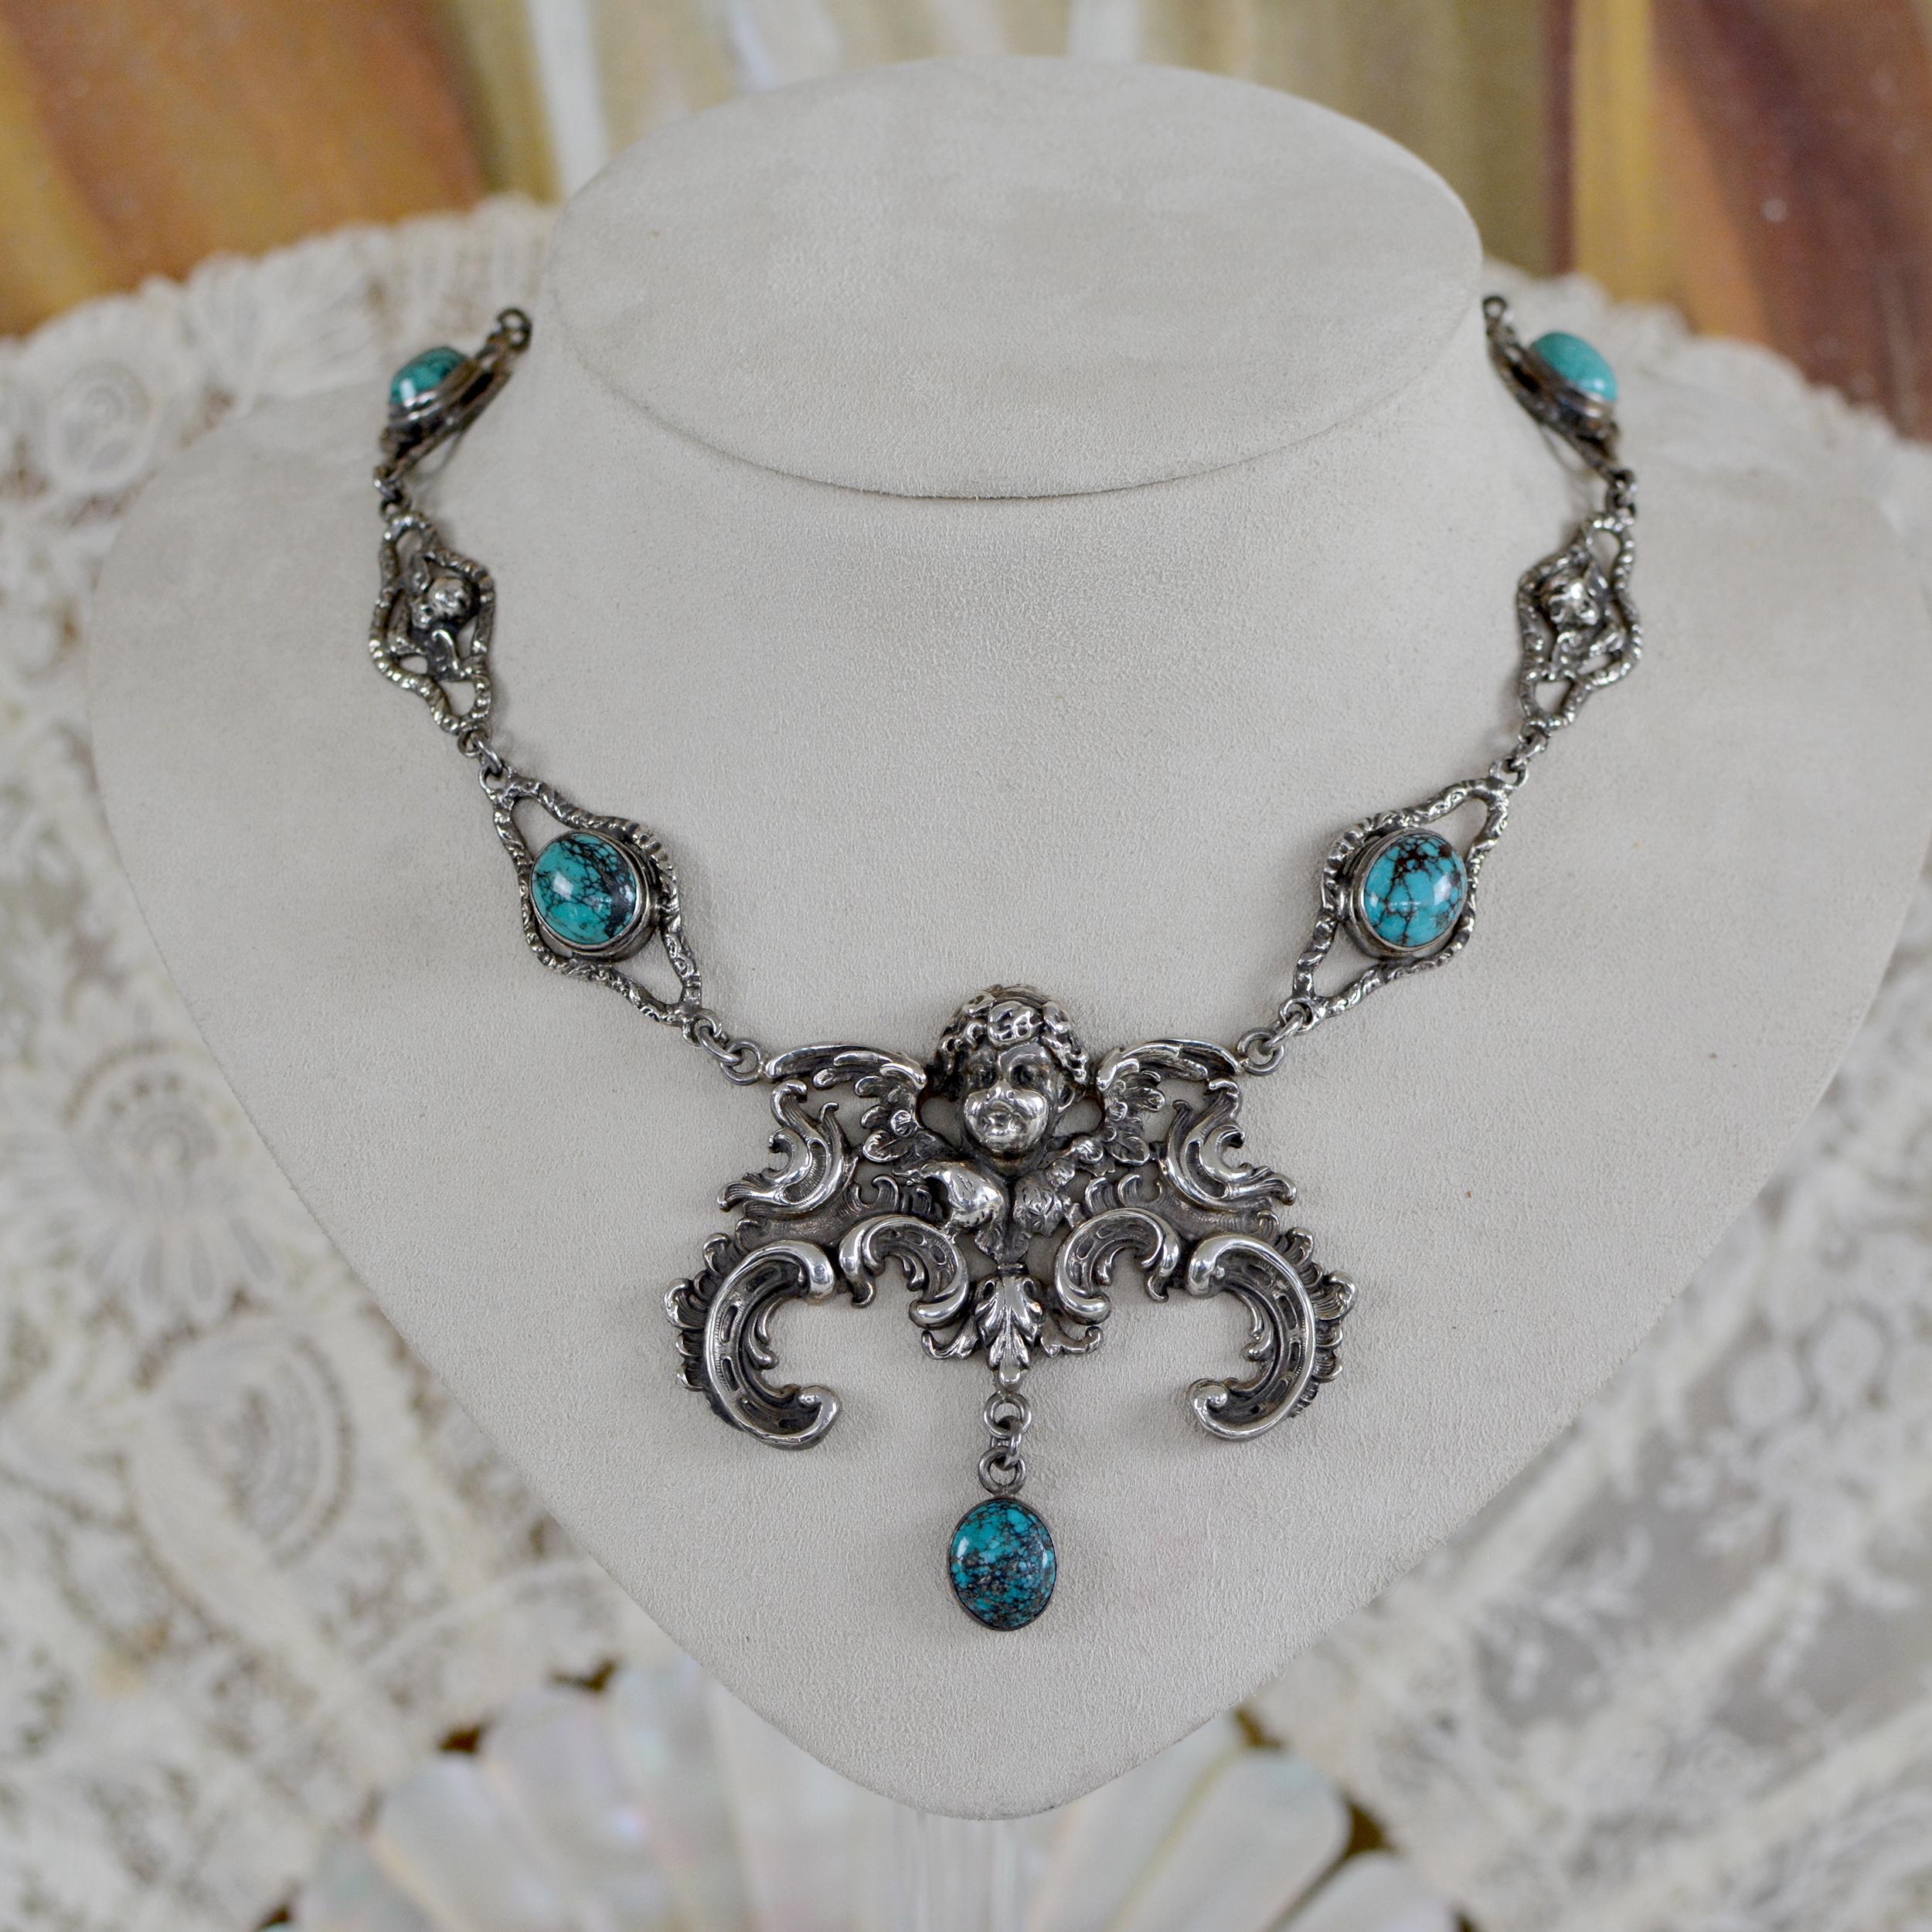 This one of a kind sterling silver drop necklace accentuates heavenly elements found in sacred adornments throughout history. An original grand figural angel with wings establishes the bold central drop for this ethereal necklace which has a single